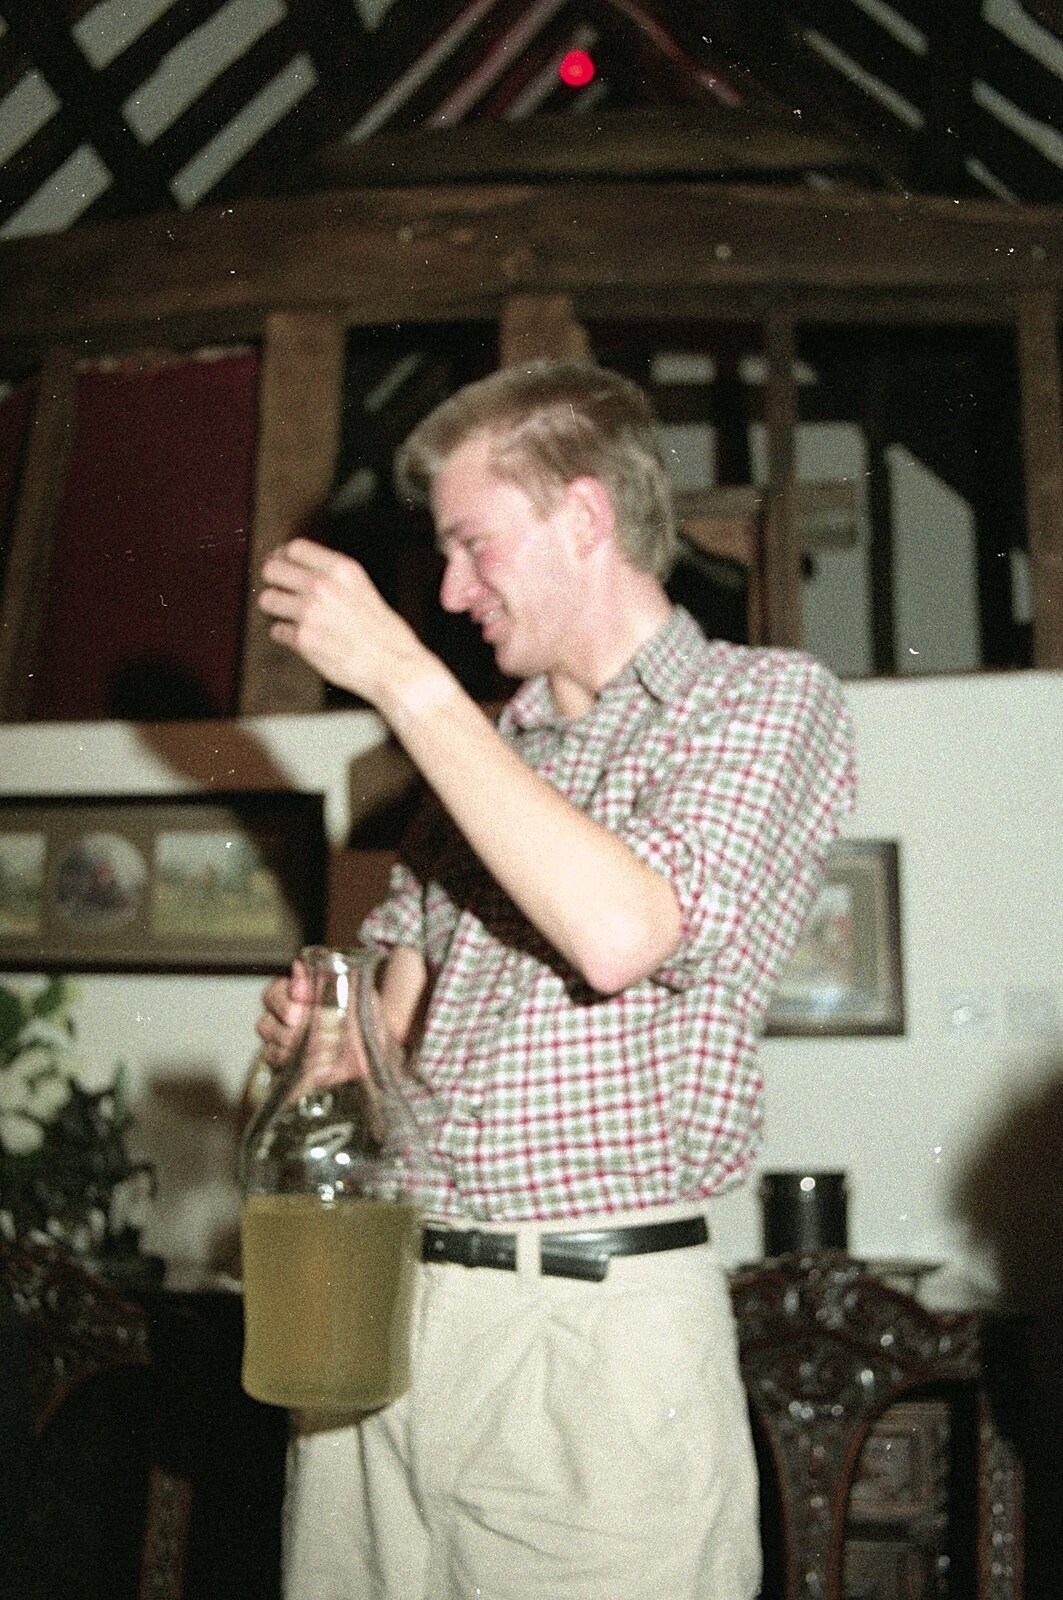 Nosher's got a whole flagon of cider from A Little Clacton Party and the Polling Caravan, Stuston, Suffolk - 4th May 1991